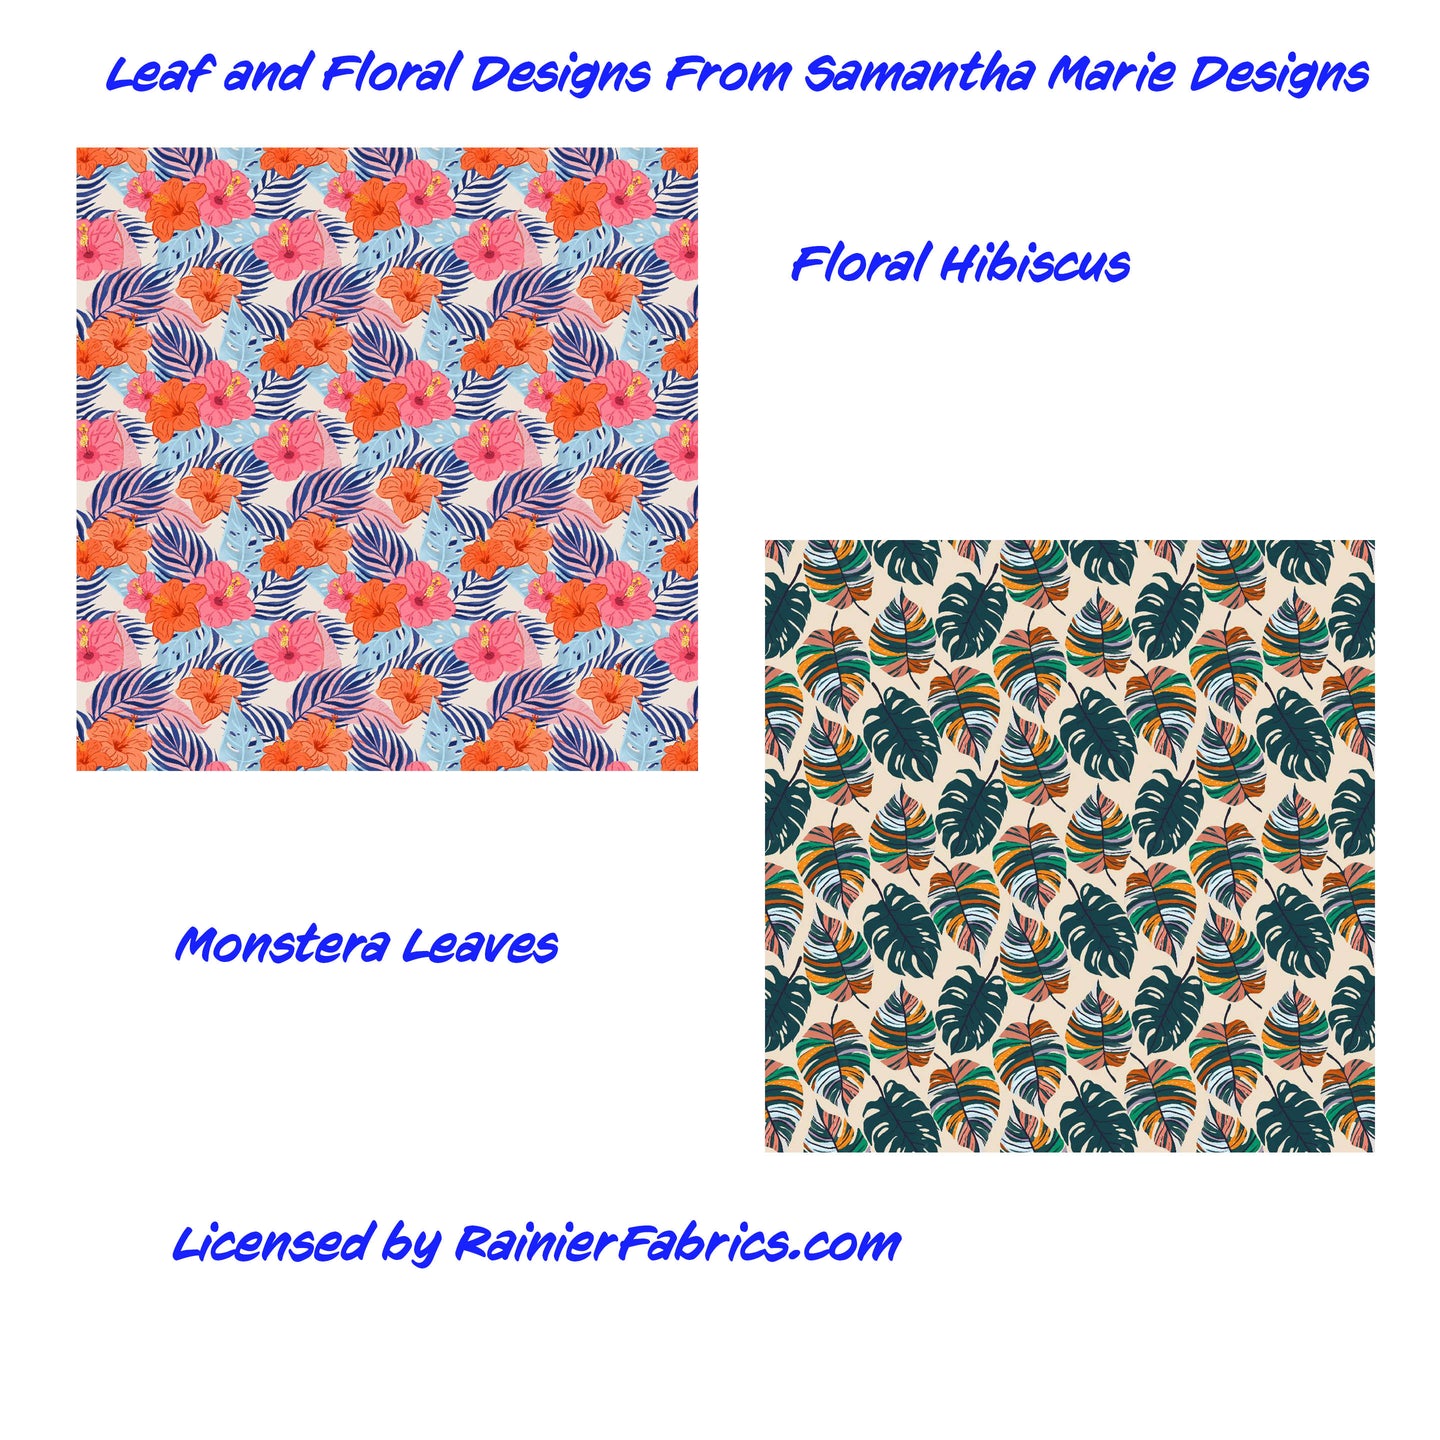 Leaves - Hibiscus Floral and Monstera Leaf - from Samantha Marie Design  - 2-5 day turnaround - Order by 1/2 yard; Description of bases below